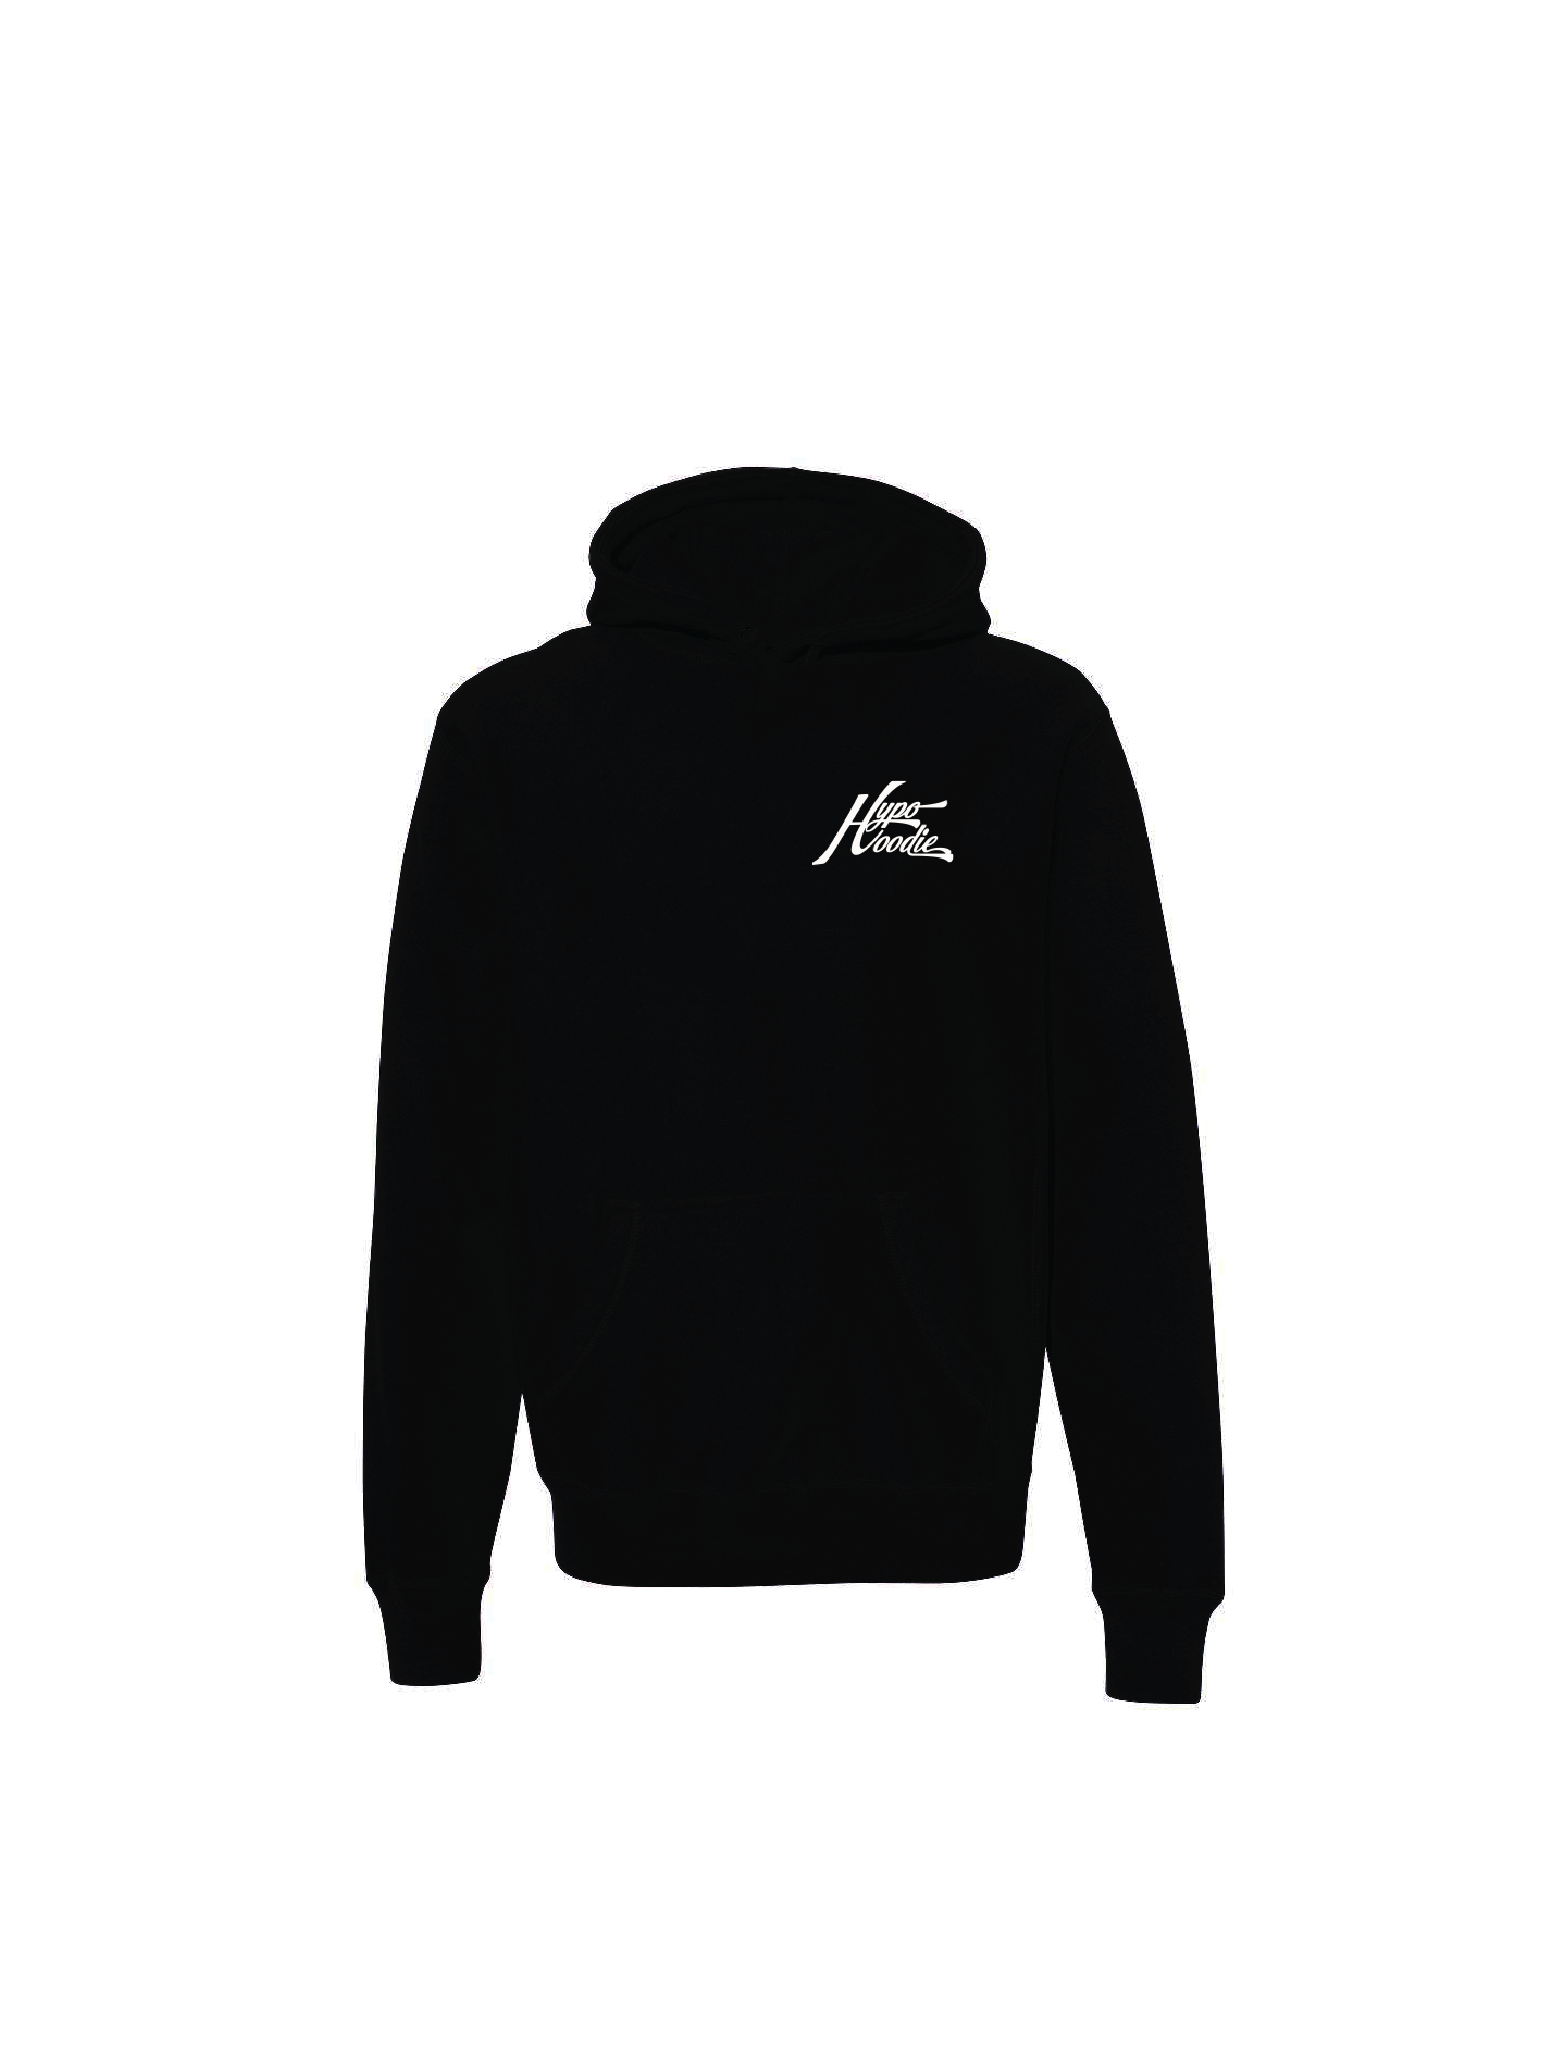 Thee Hypo Hoodie Pull Over - Hypo Footwear Company